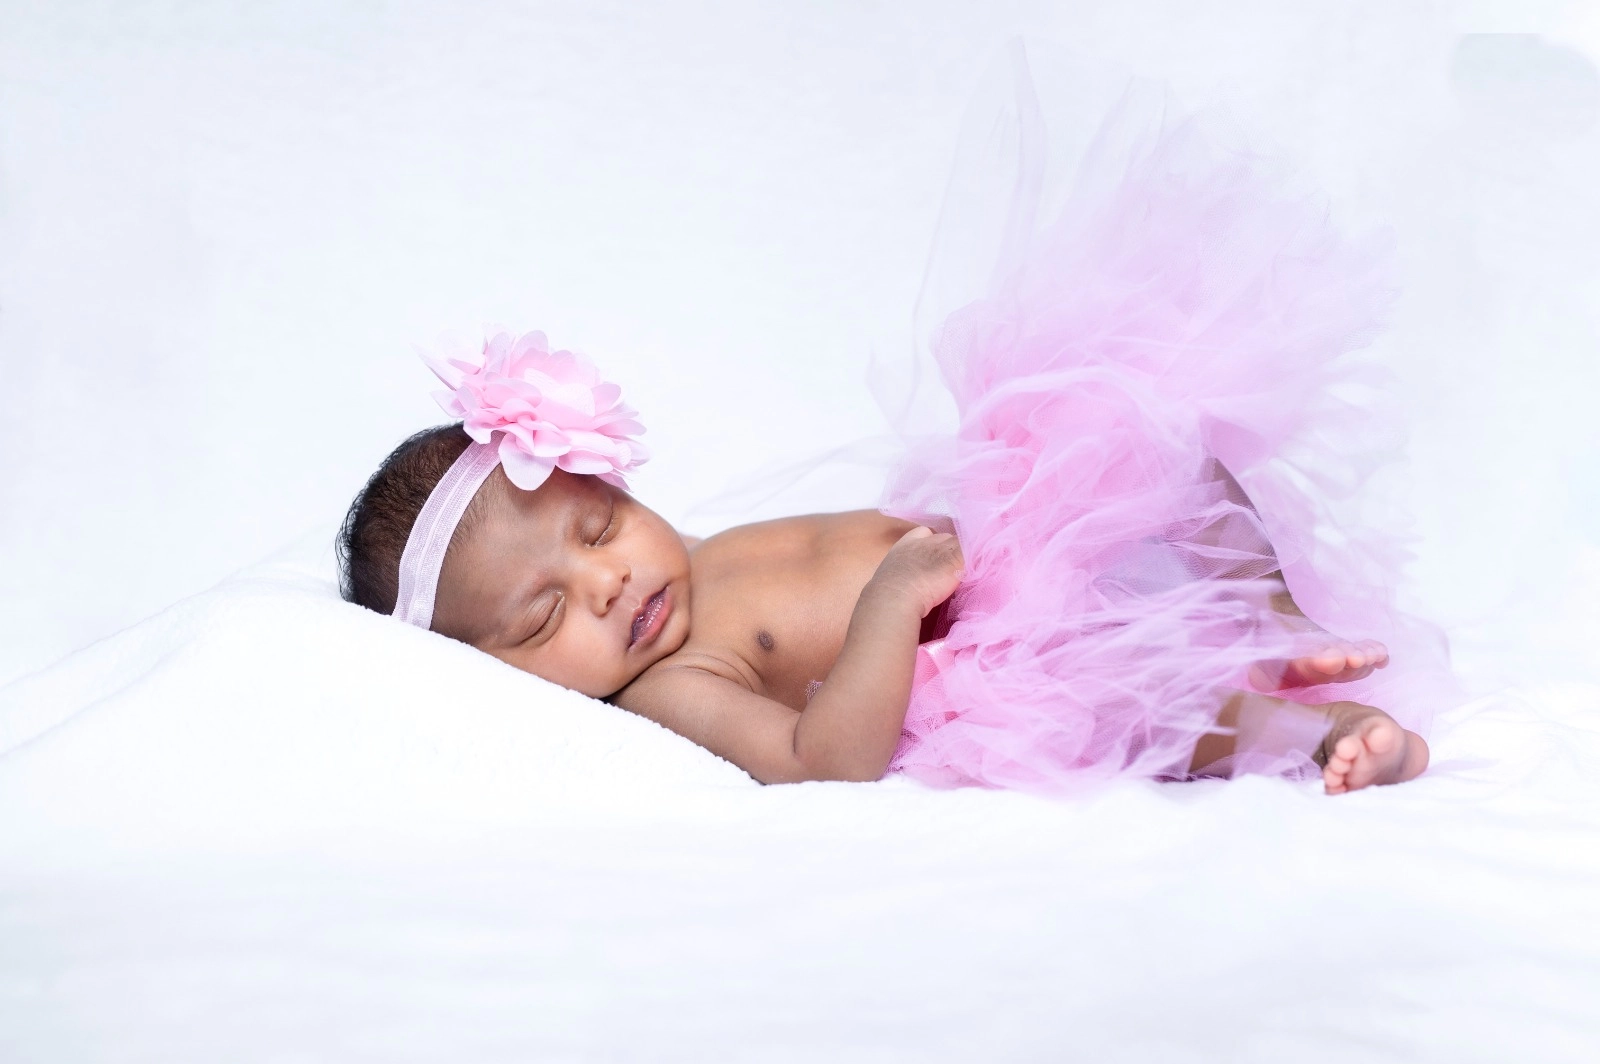 baby shoot / dsfotography